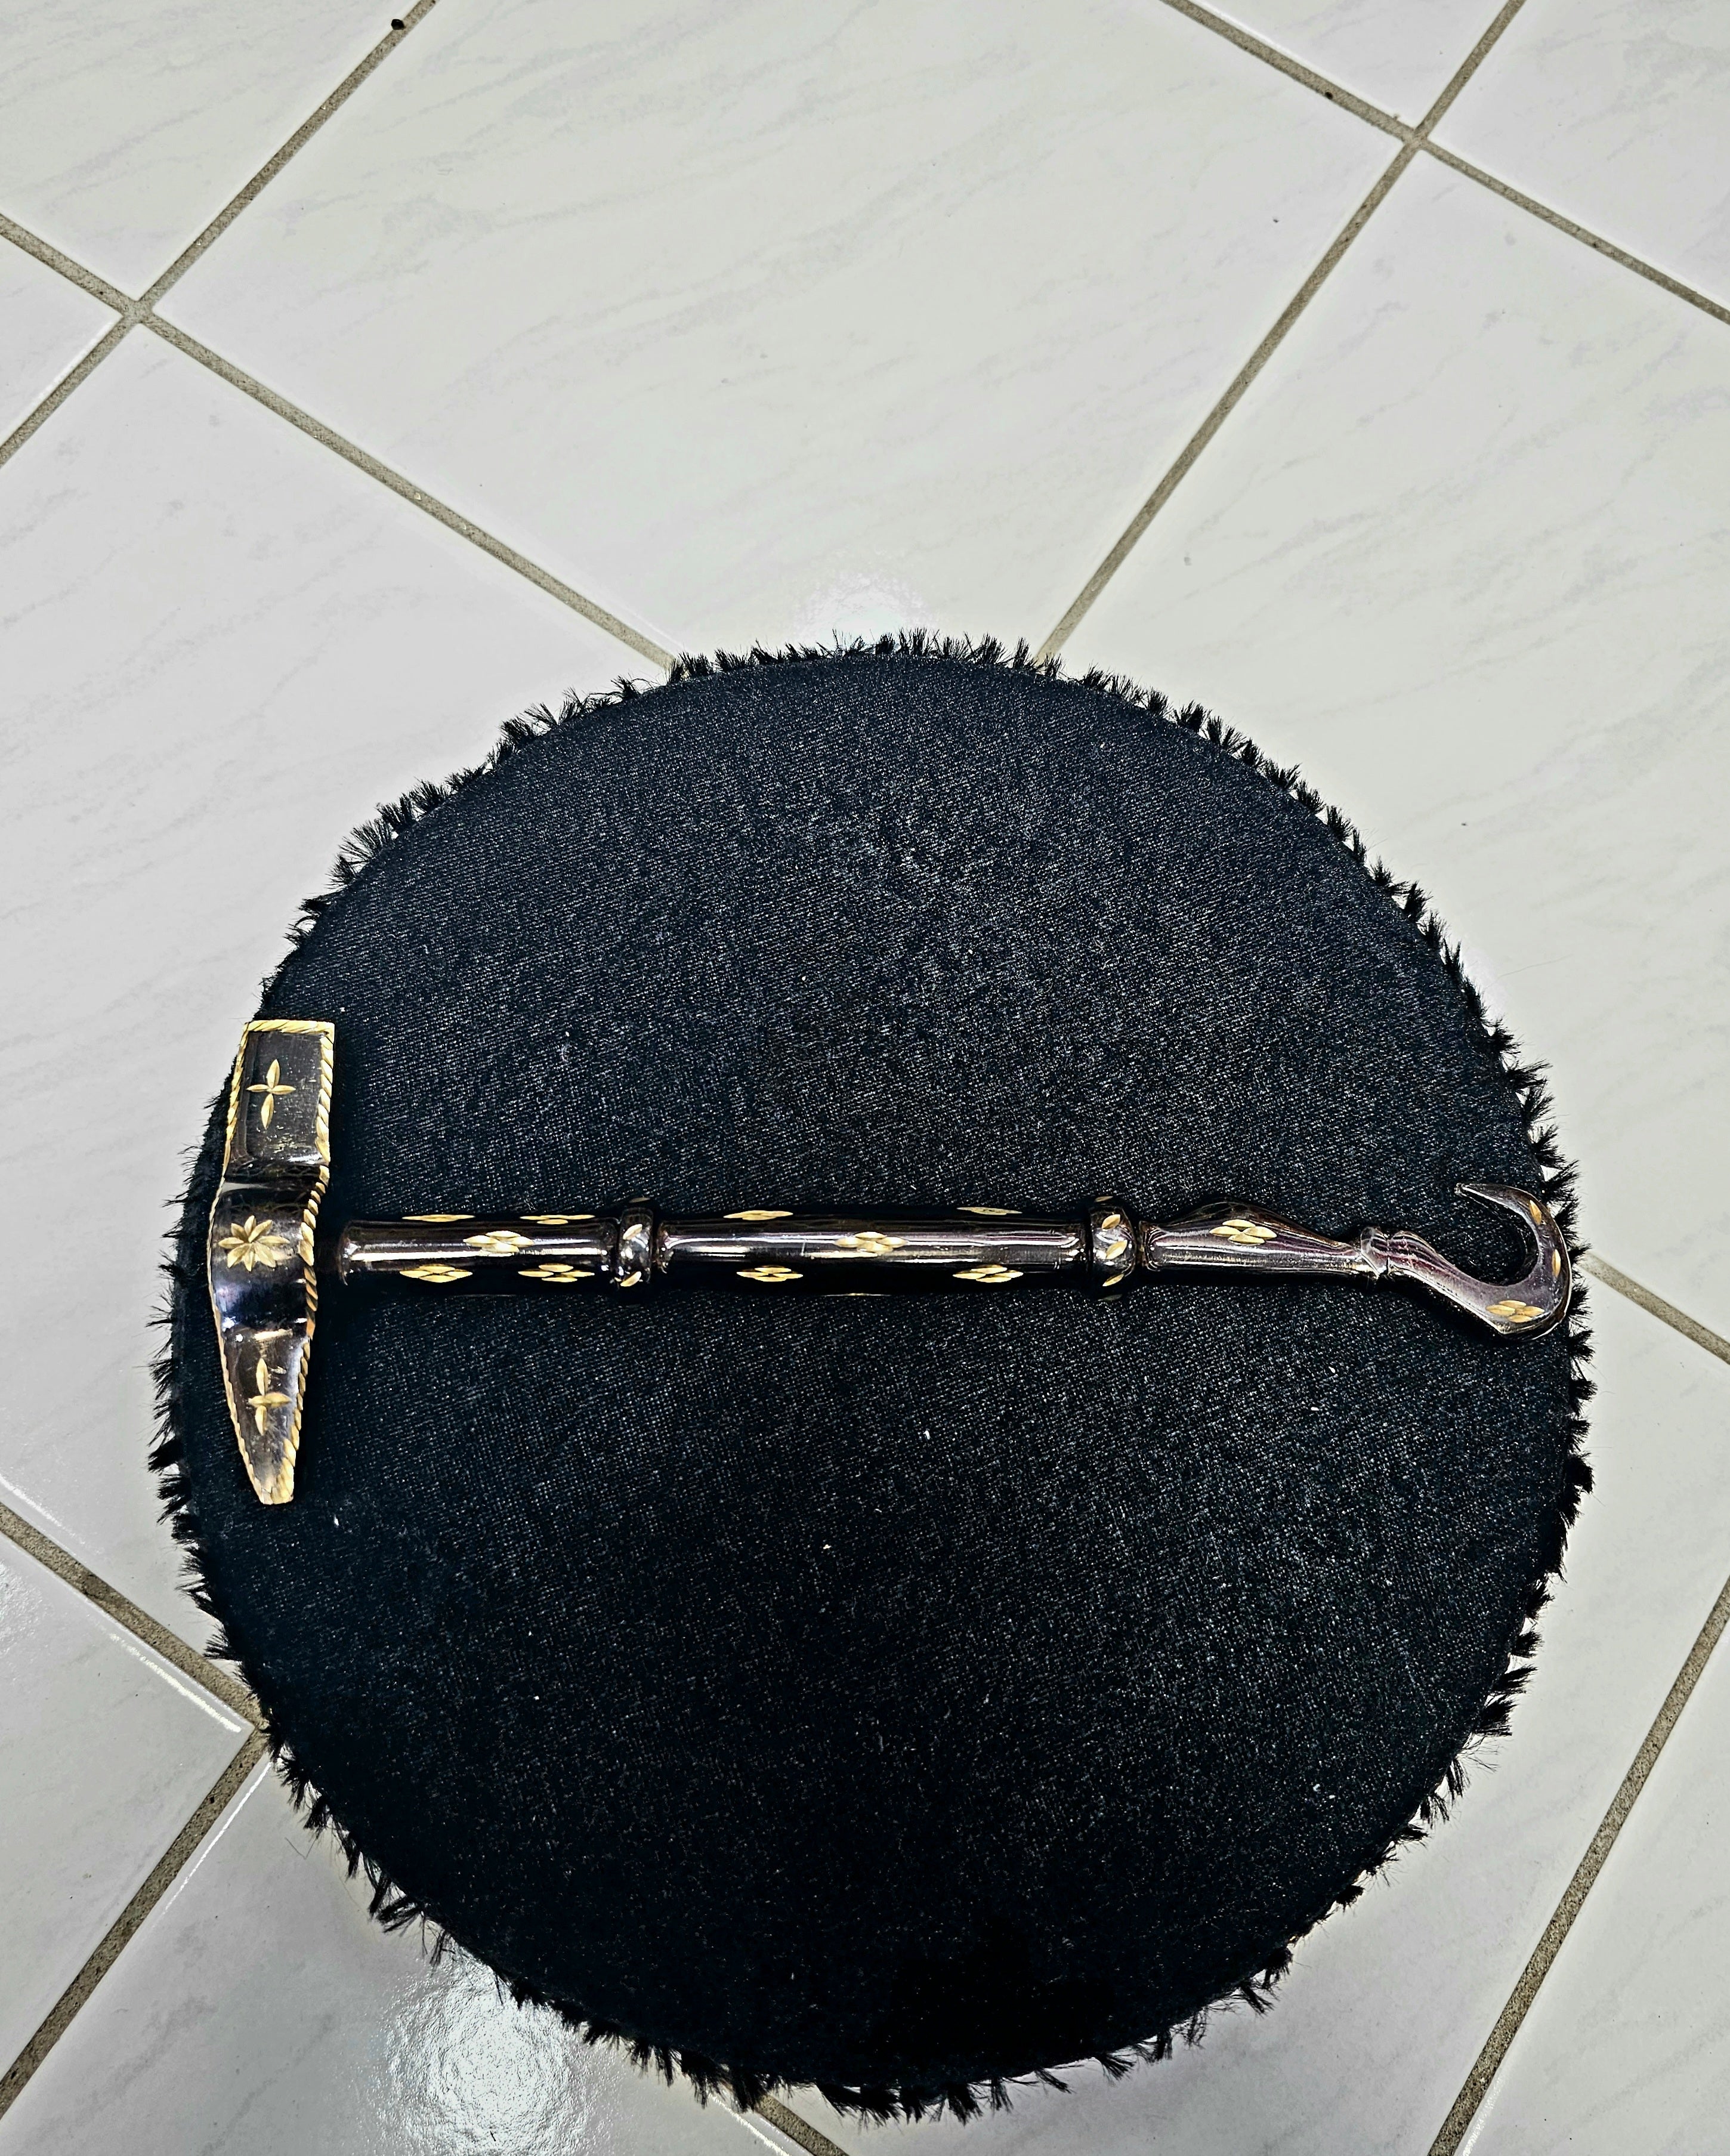 Onyx Opulence: Premium Black Tabla Hammer with Gold Accents